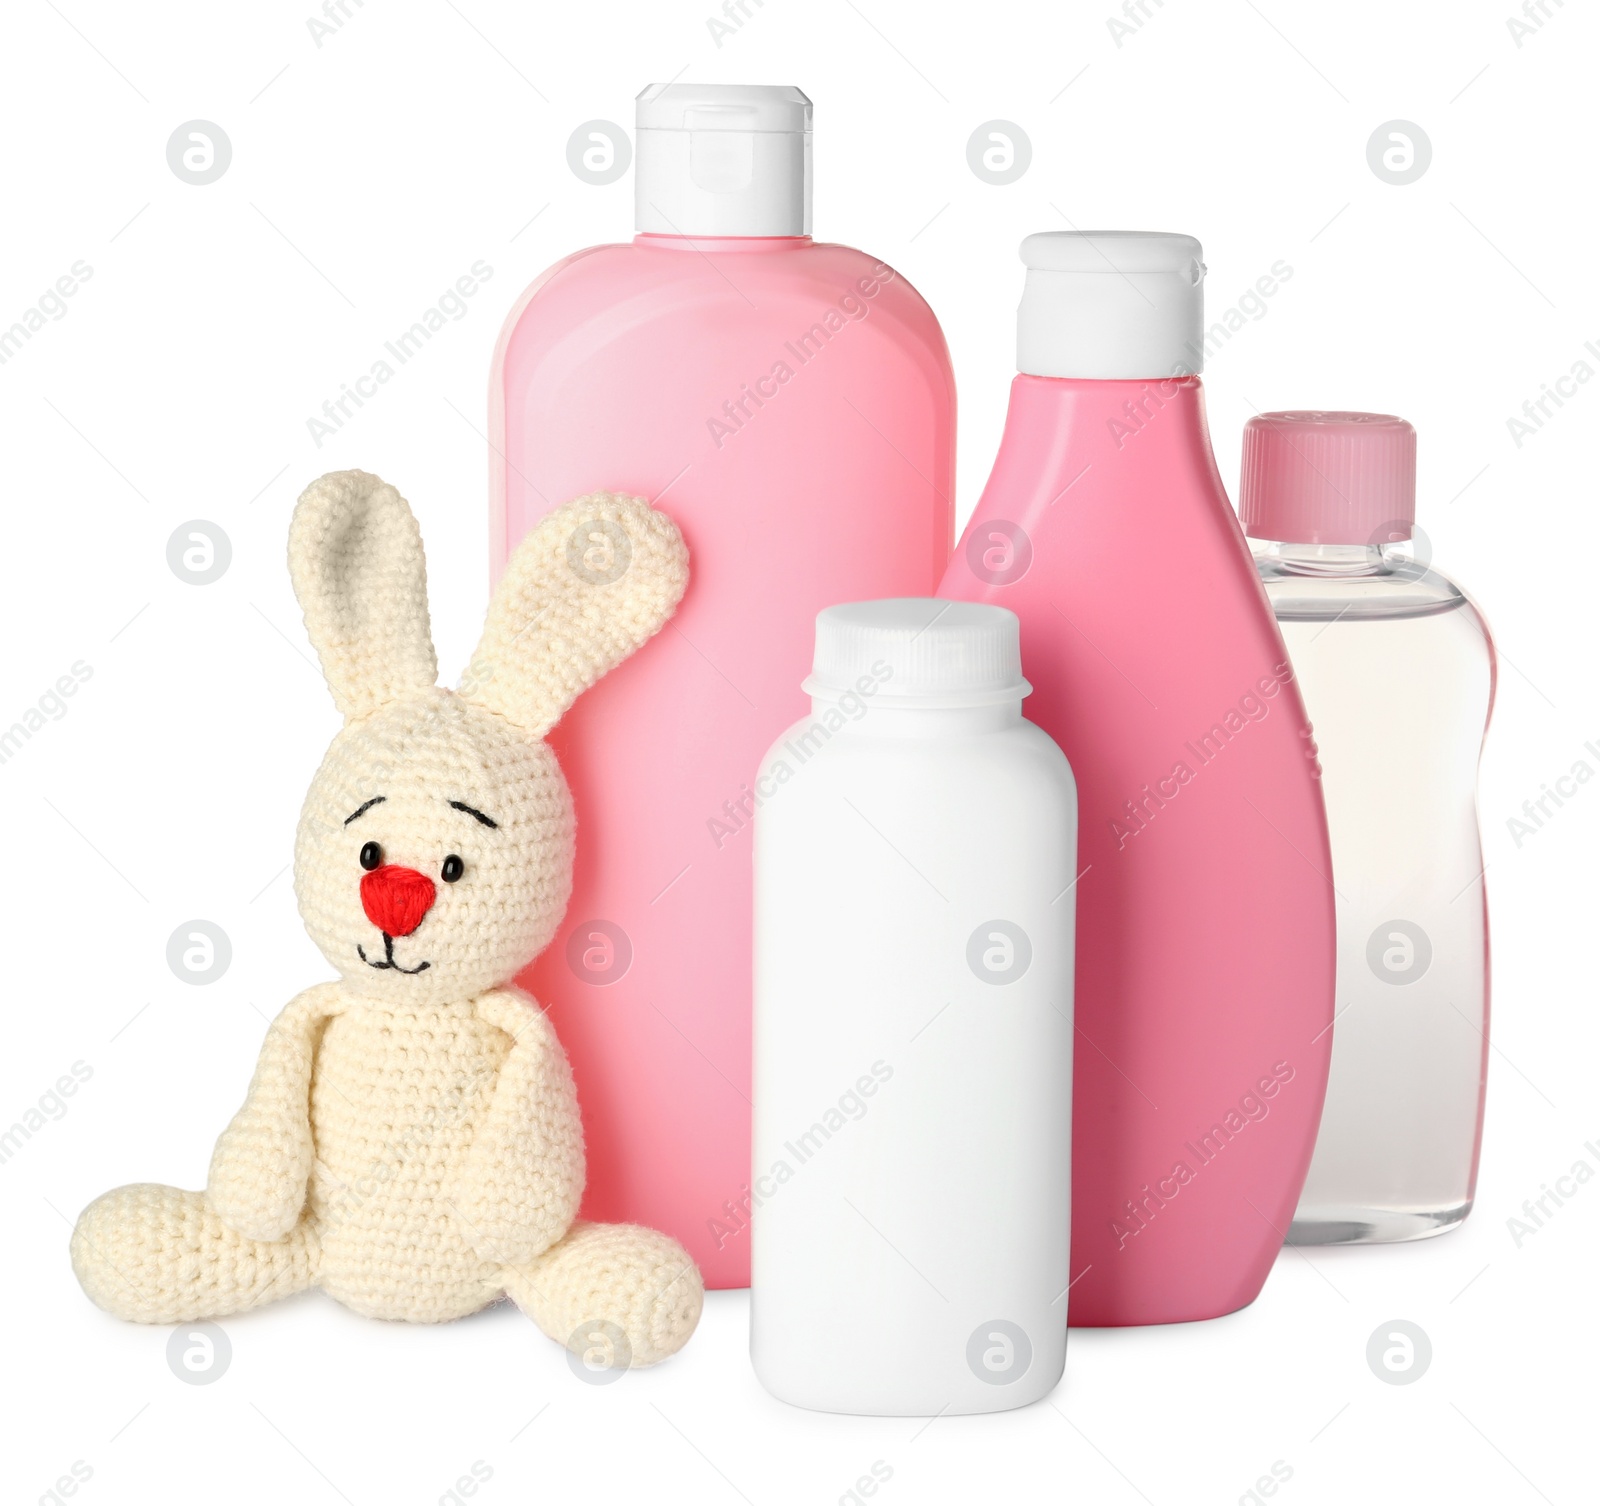 Photo of Bottles of baby cosmetic products and toy bunny on white background